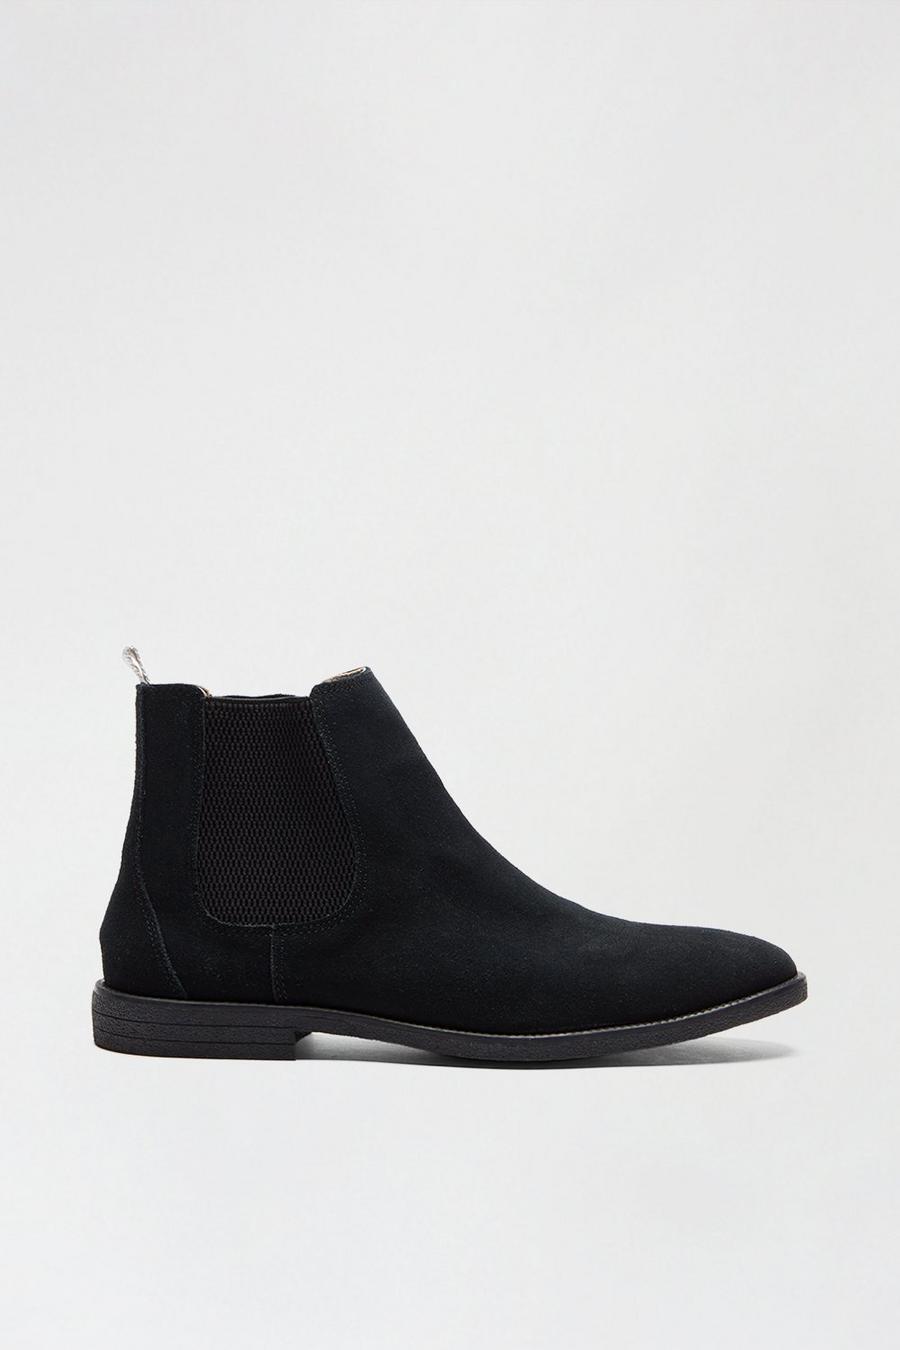 Black Real Suede Chelsea Boots